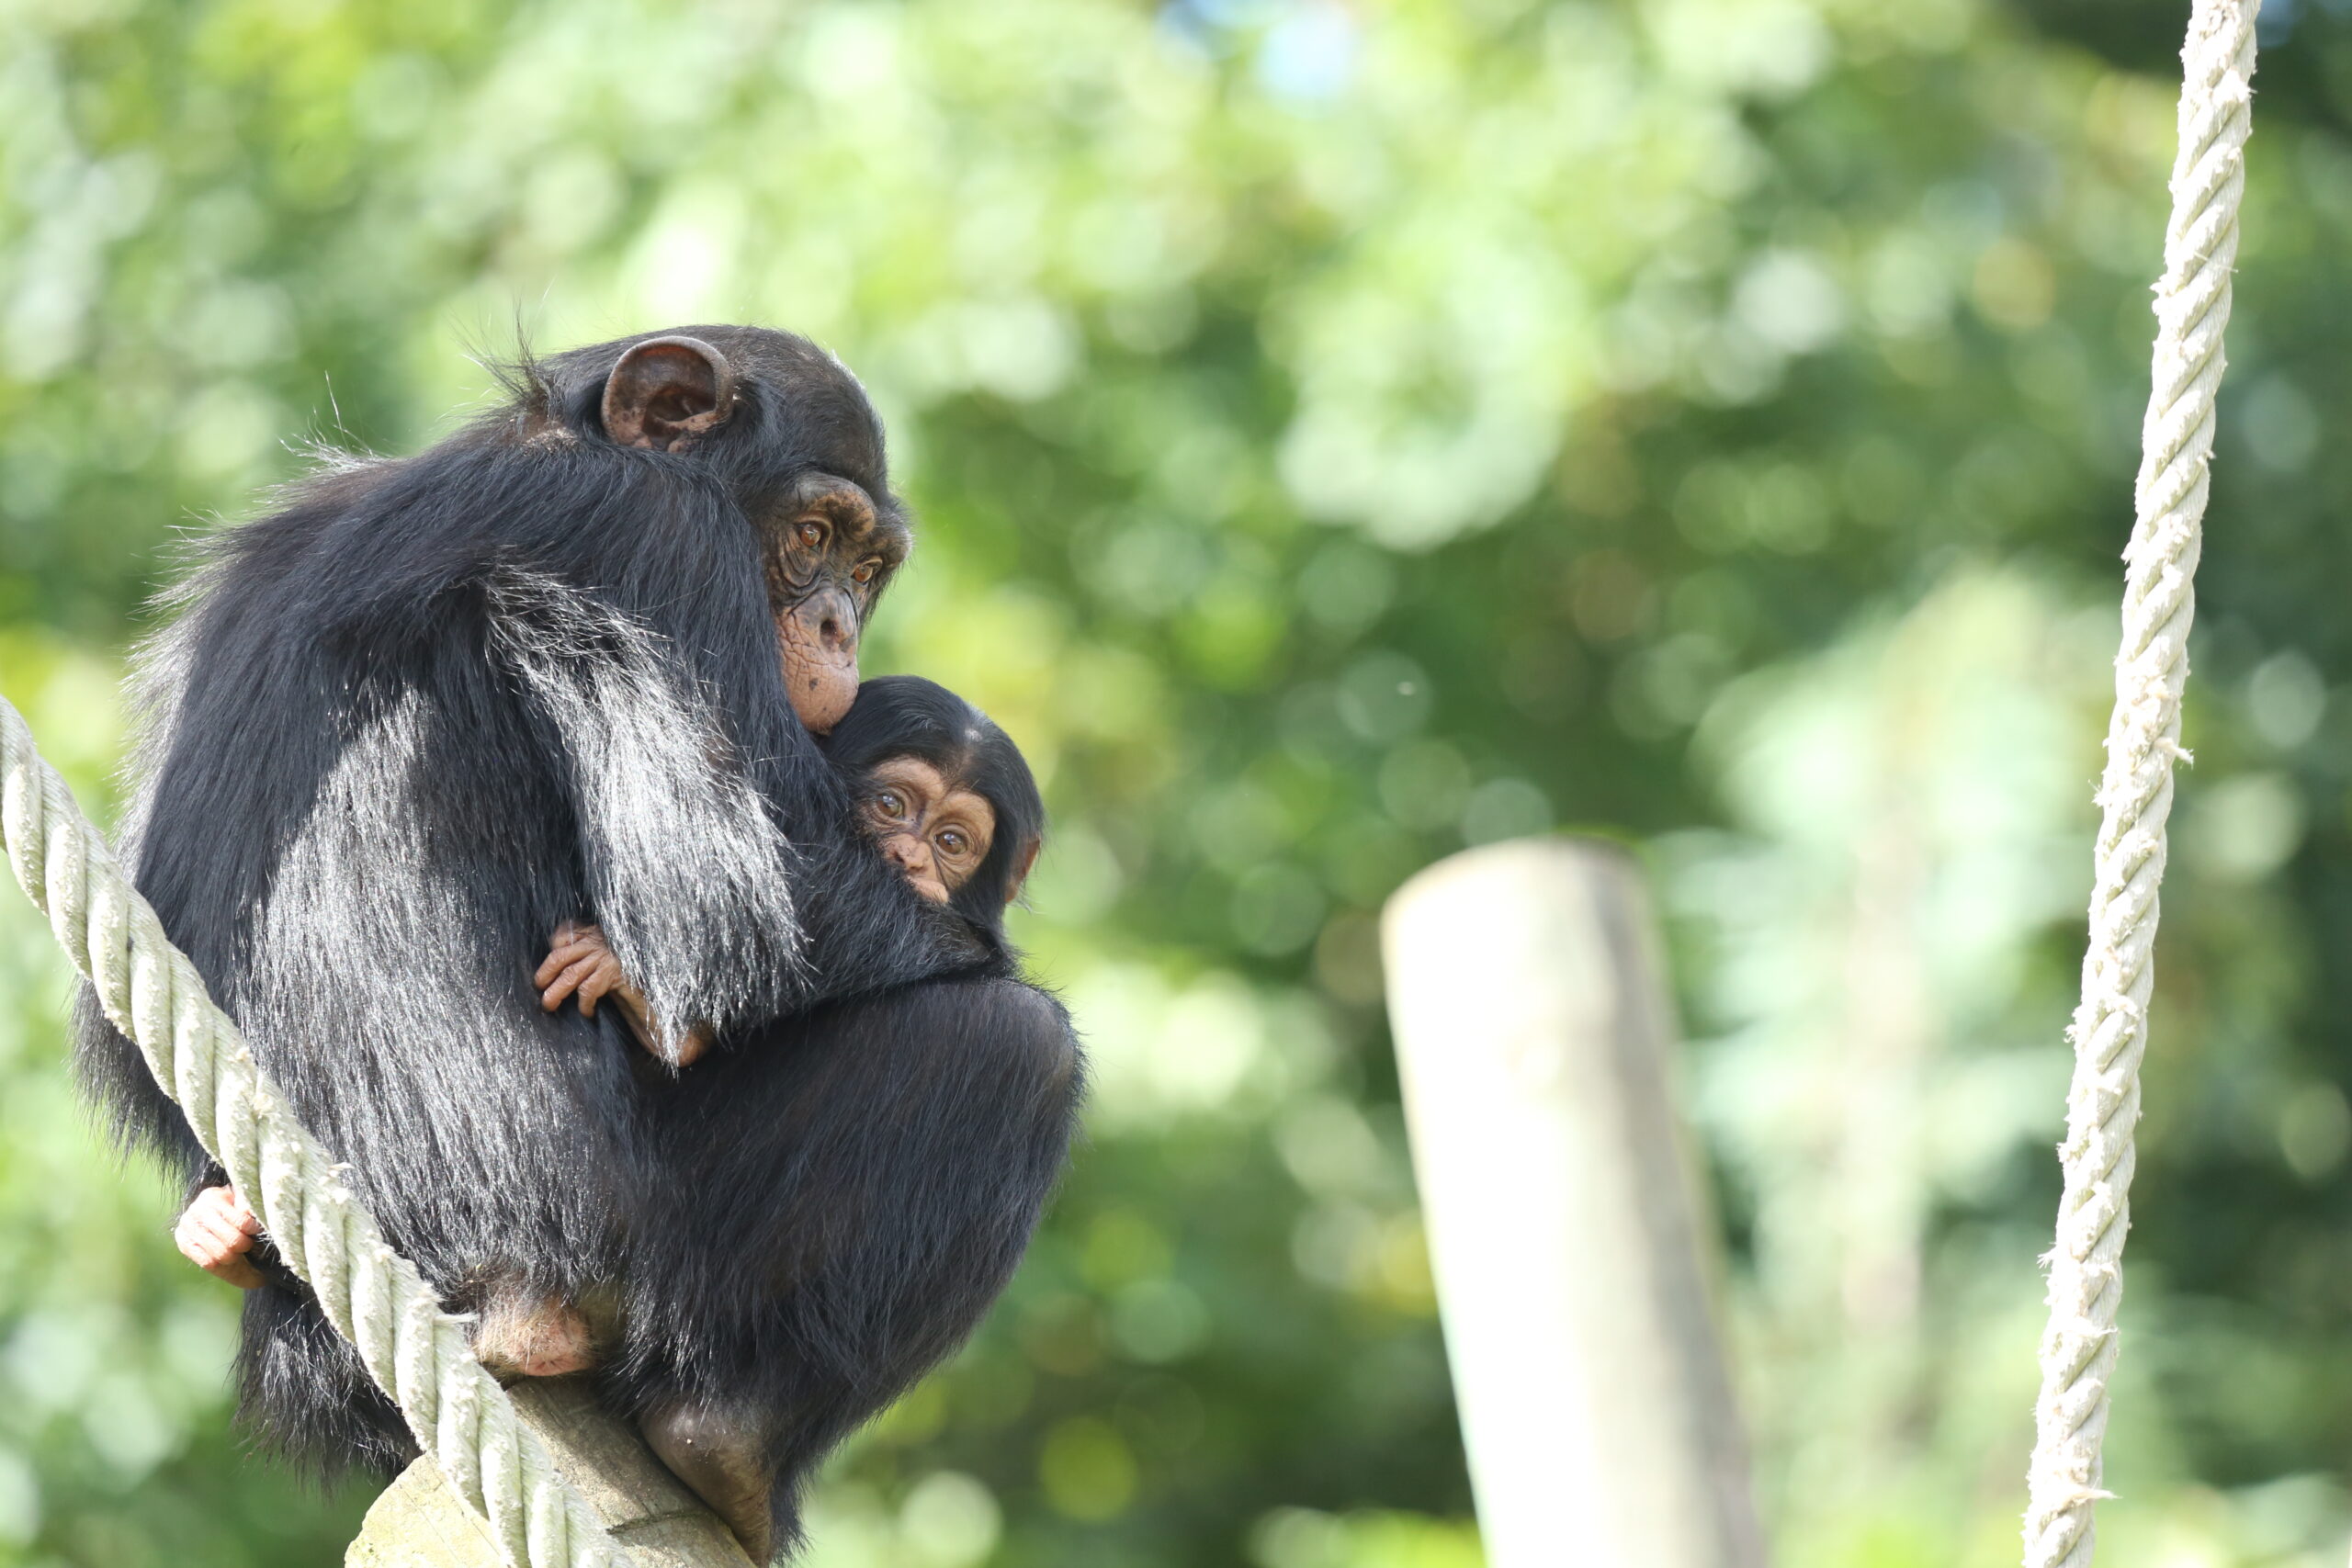 A mother and baby chimp hug each other atop a wooden structure in a human-made habitat